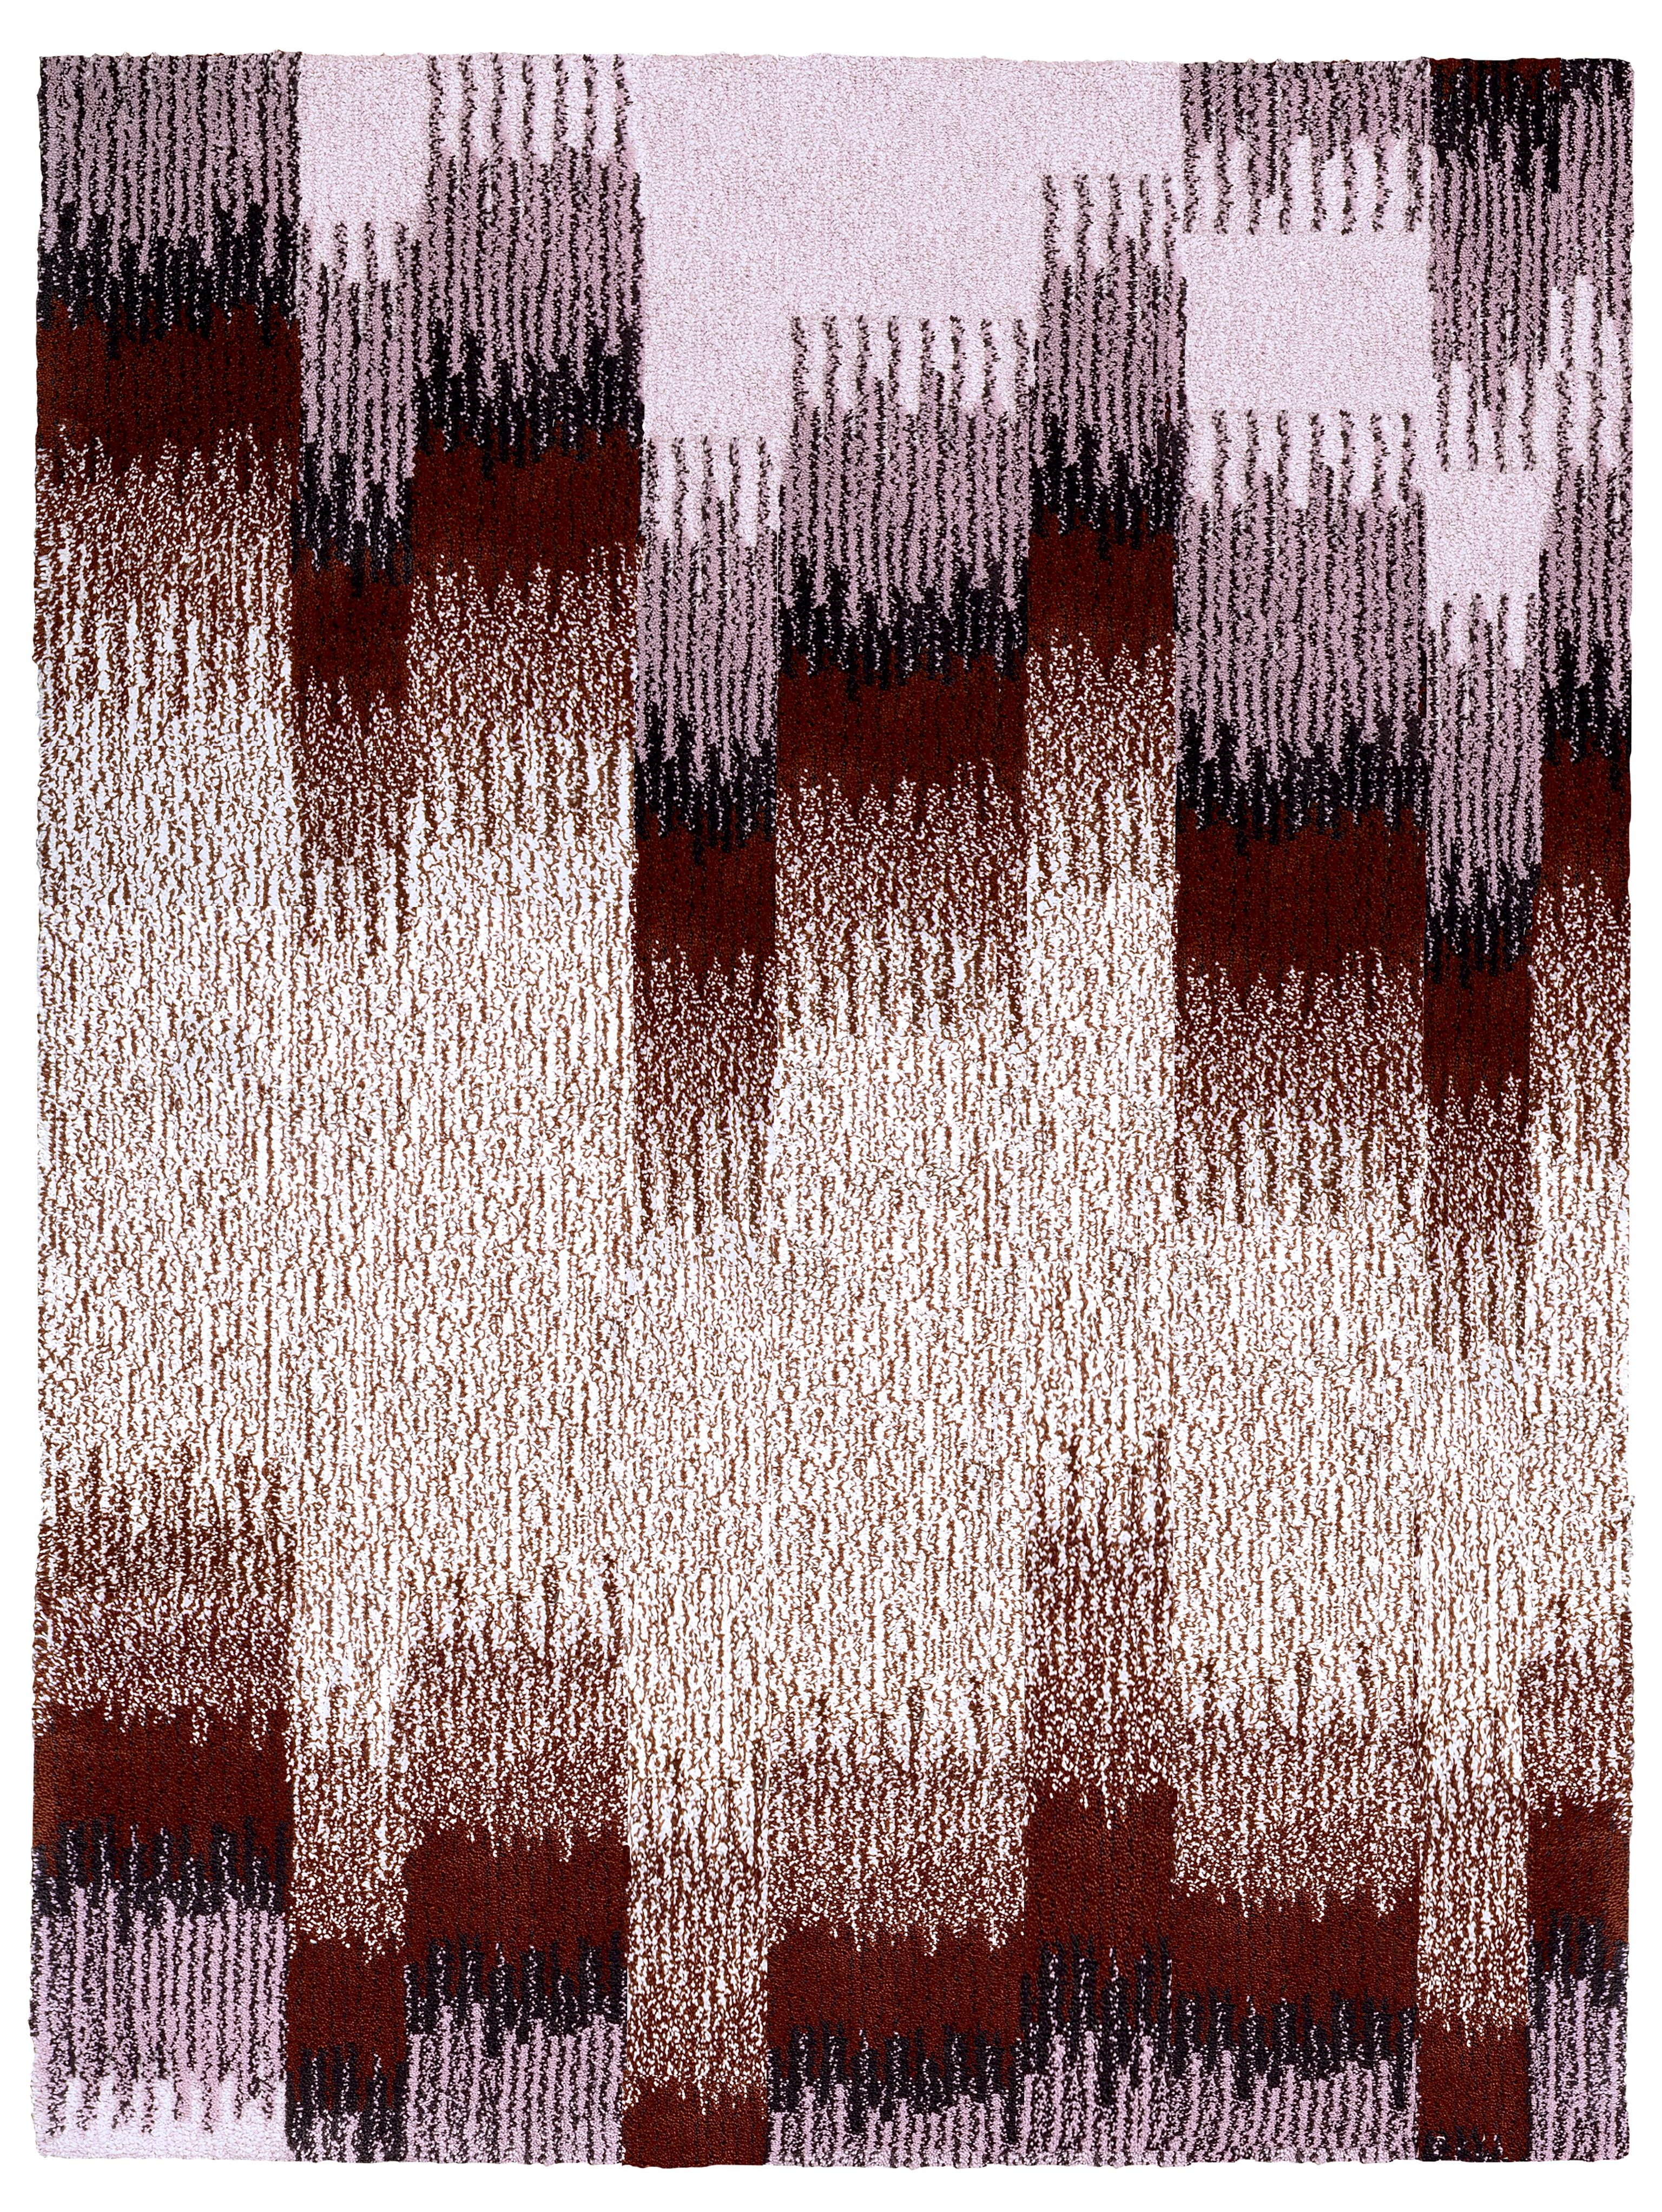 Ash Bordeaux Epoca Due rug by Alissa + Nienke 
Dimensions: W 200 x H 260 cm
Materials: 100% New Zealand top quality wool
Available in sizes: Medium (150 x 200cm) and Extra Large (300 x 390cm). Also available in colors: Royal Blue/Brick and,